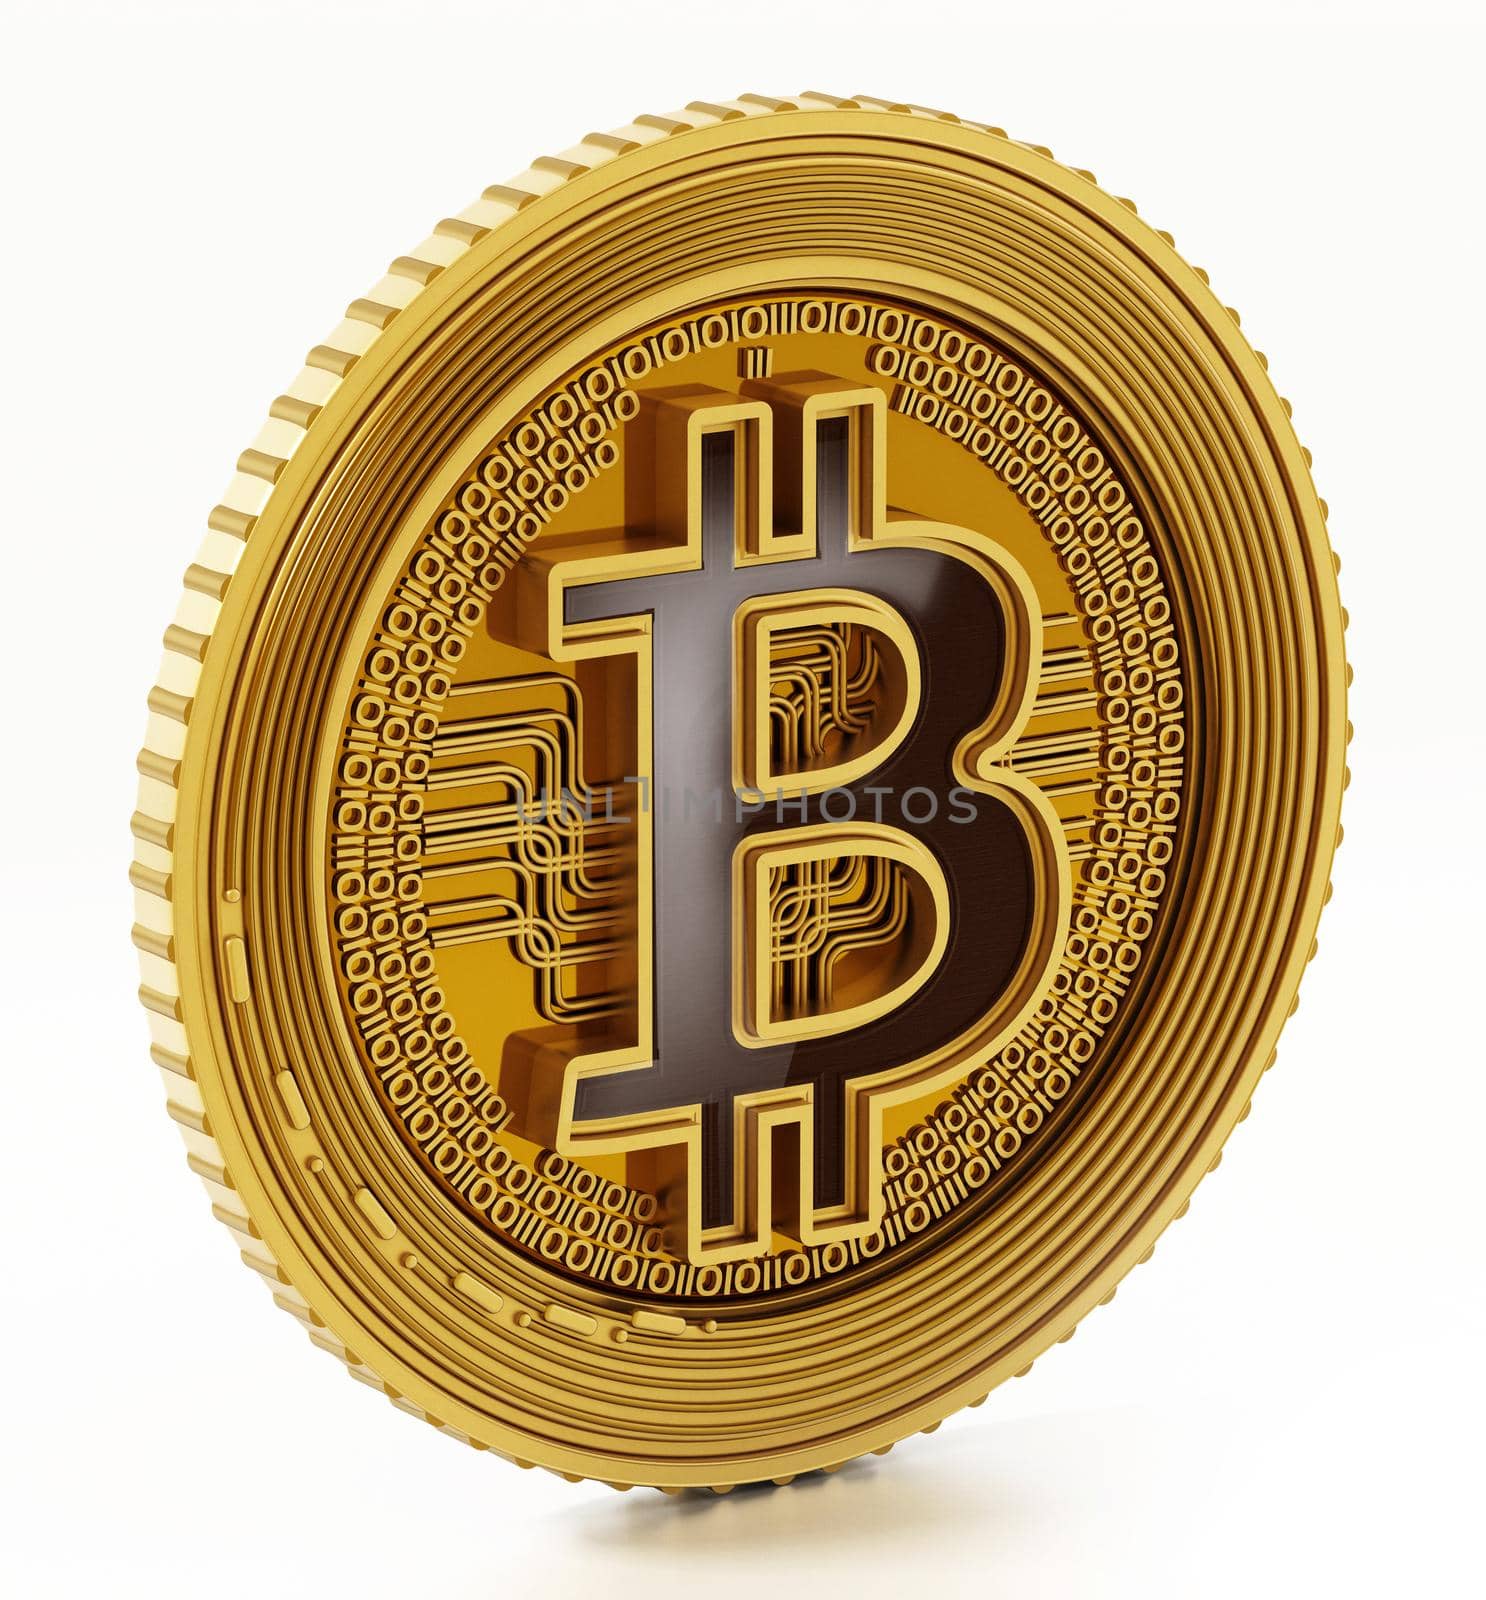 Golden crypto currency coin isolated on white background. 3D illustration.